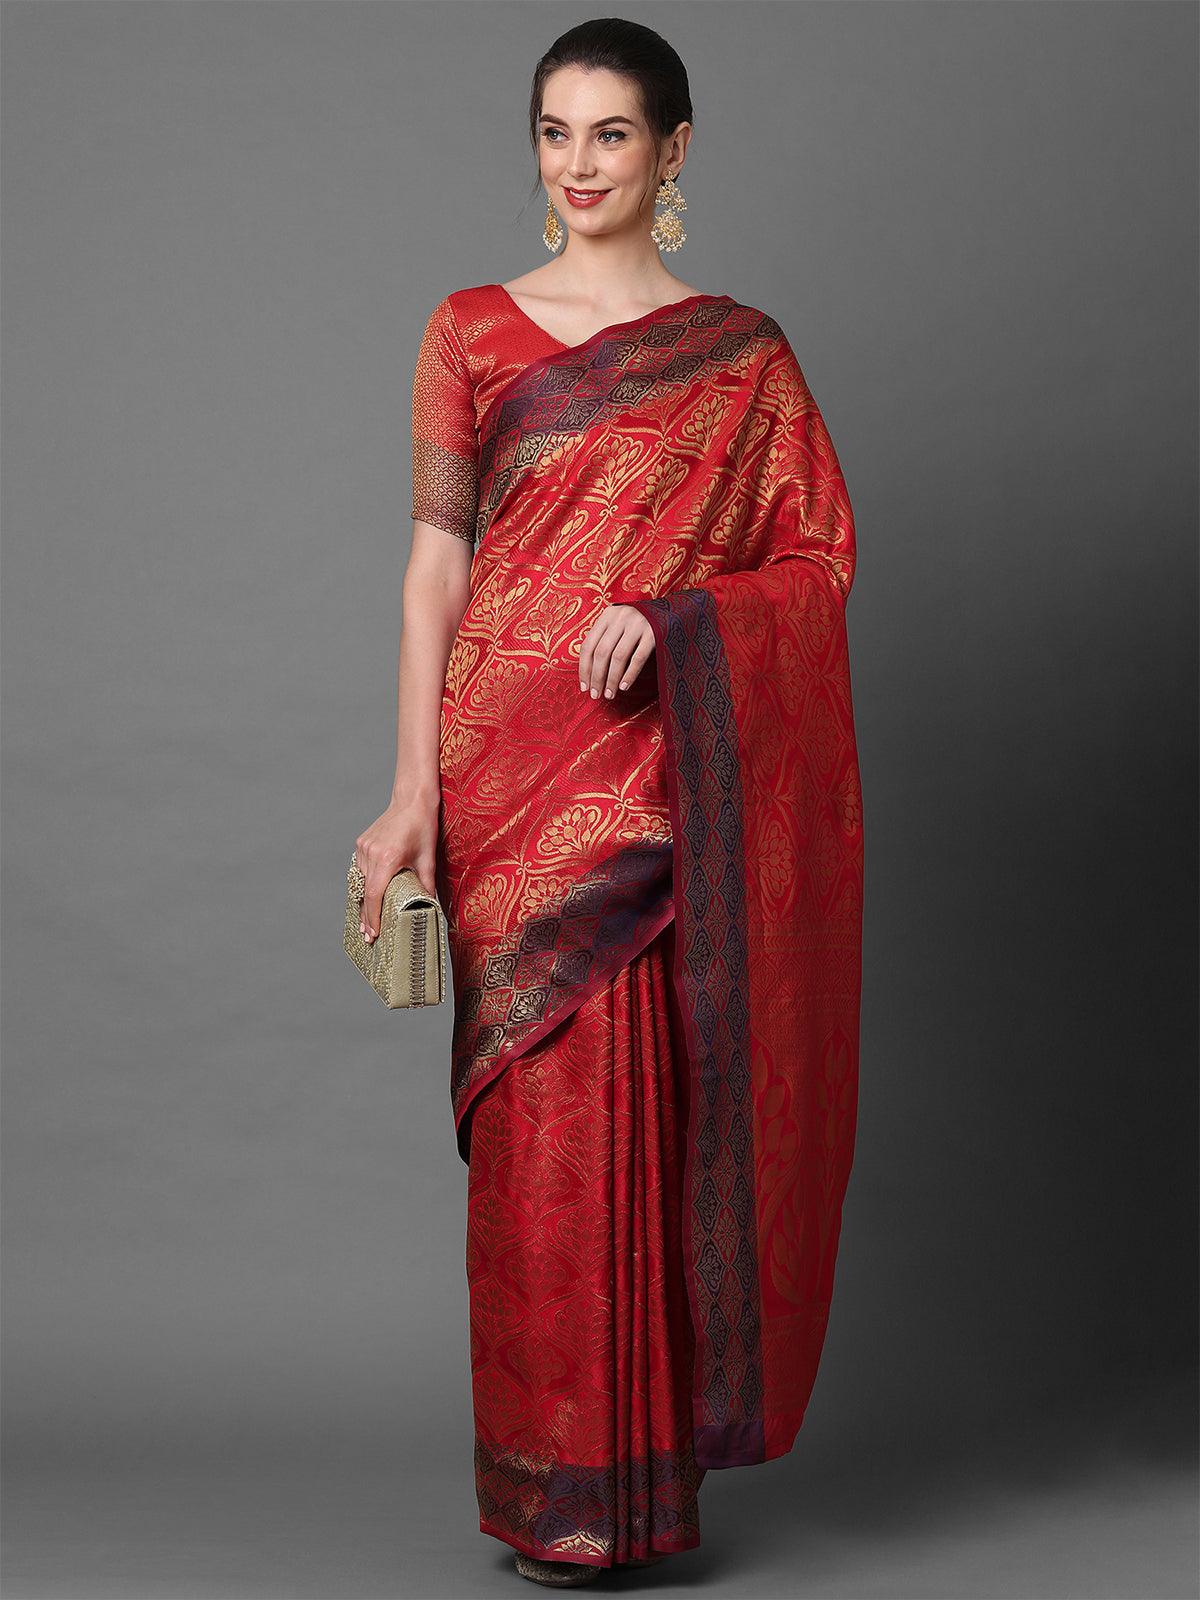 Women's Red Party Wear Pure Satin Woven Design Saree With Unstitched Blouse - Odette